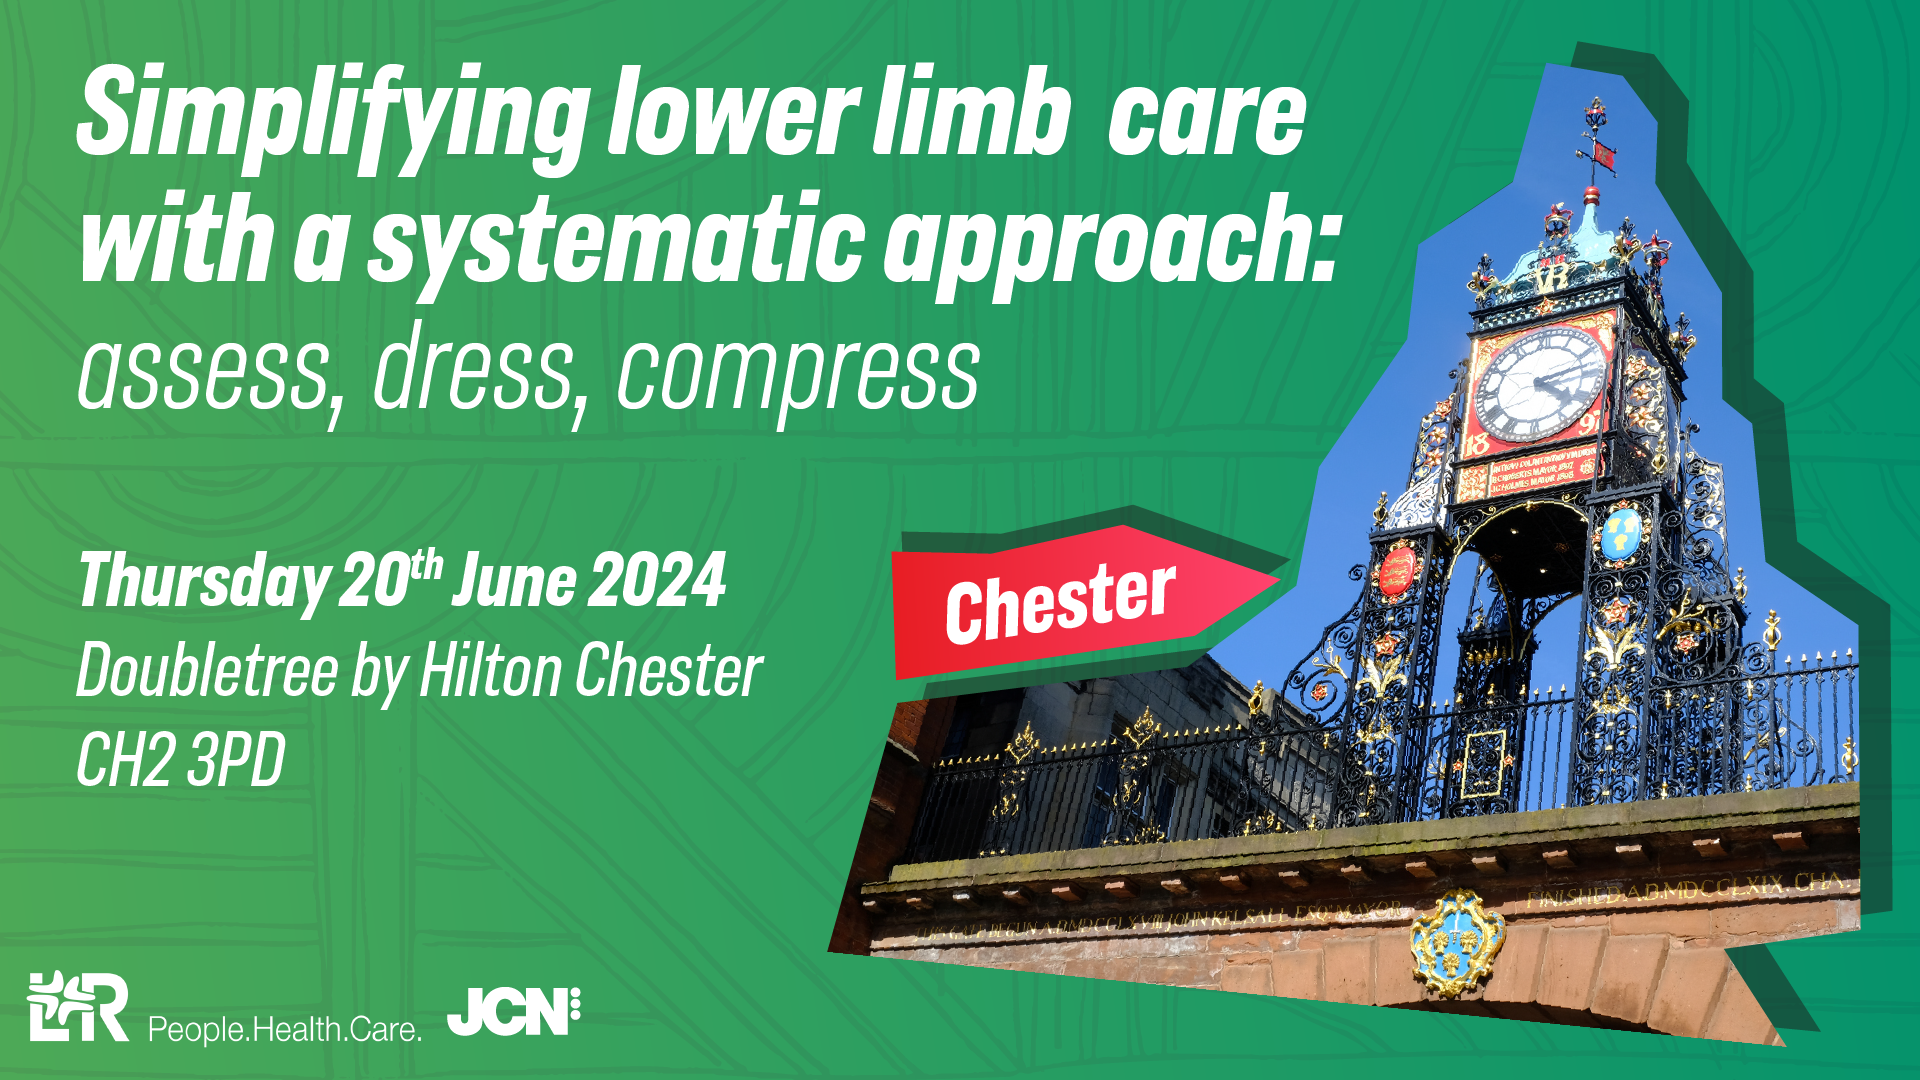 Simplifying Lower limb care with a systematic approach: assess, dress, compress - Chester